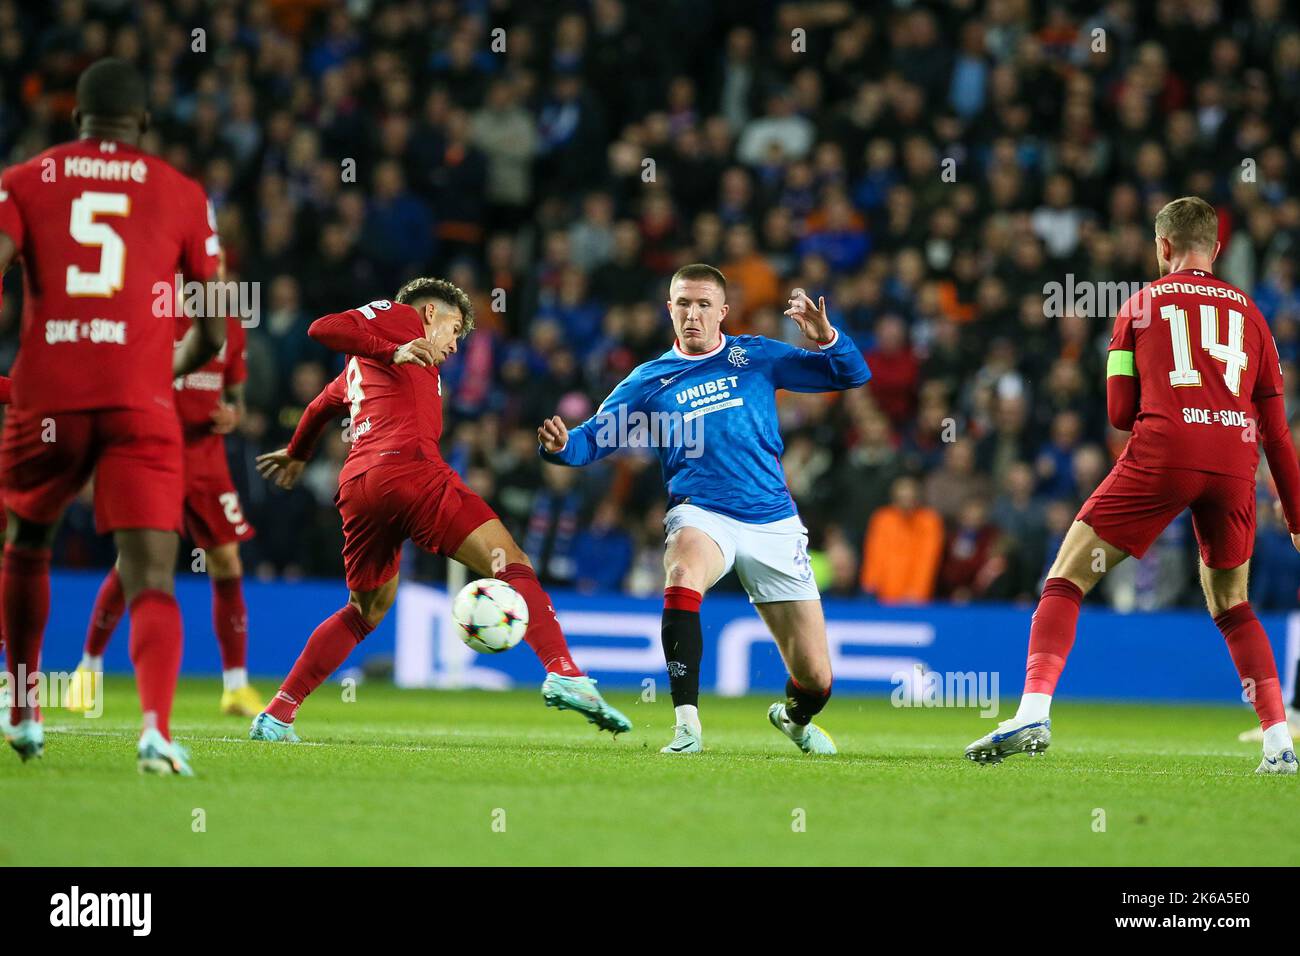 Glasgow, UK. 12th Oct, 2022. In the second game of the group stages of the Champions League, between these two teams Rangers FC play Liverpool FC at Ibrox, Rangers home stadium in Glasgow. The first game between these two teams in the Champions League, Liverpool won 2 - 0. Credit: Findlay/Alamy Live News Stock Photo